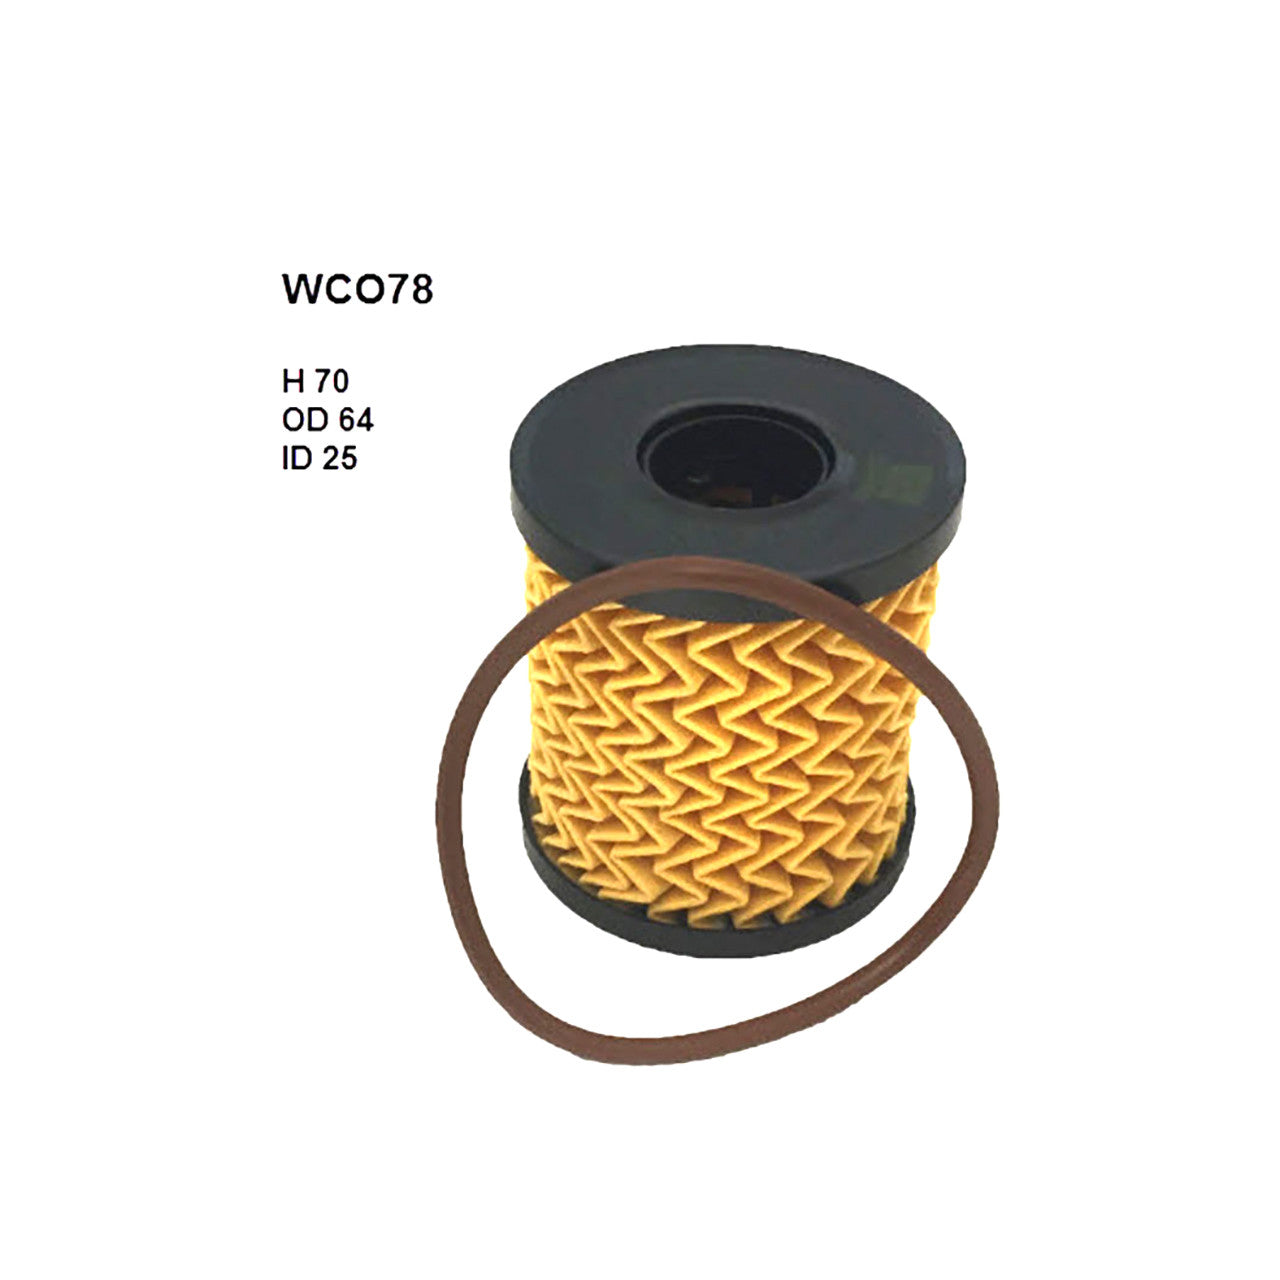 WCO78 Wesfil Cooper Oil Filter for Ford (Cross Ref: R2654P / R2663P)